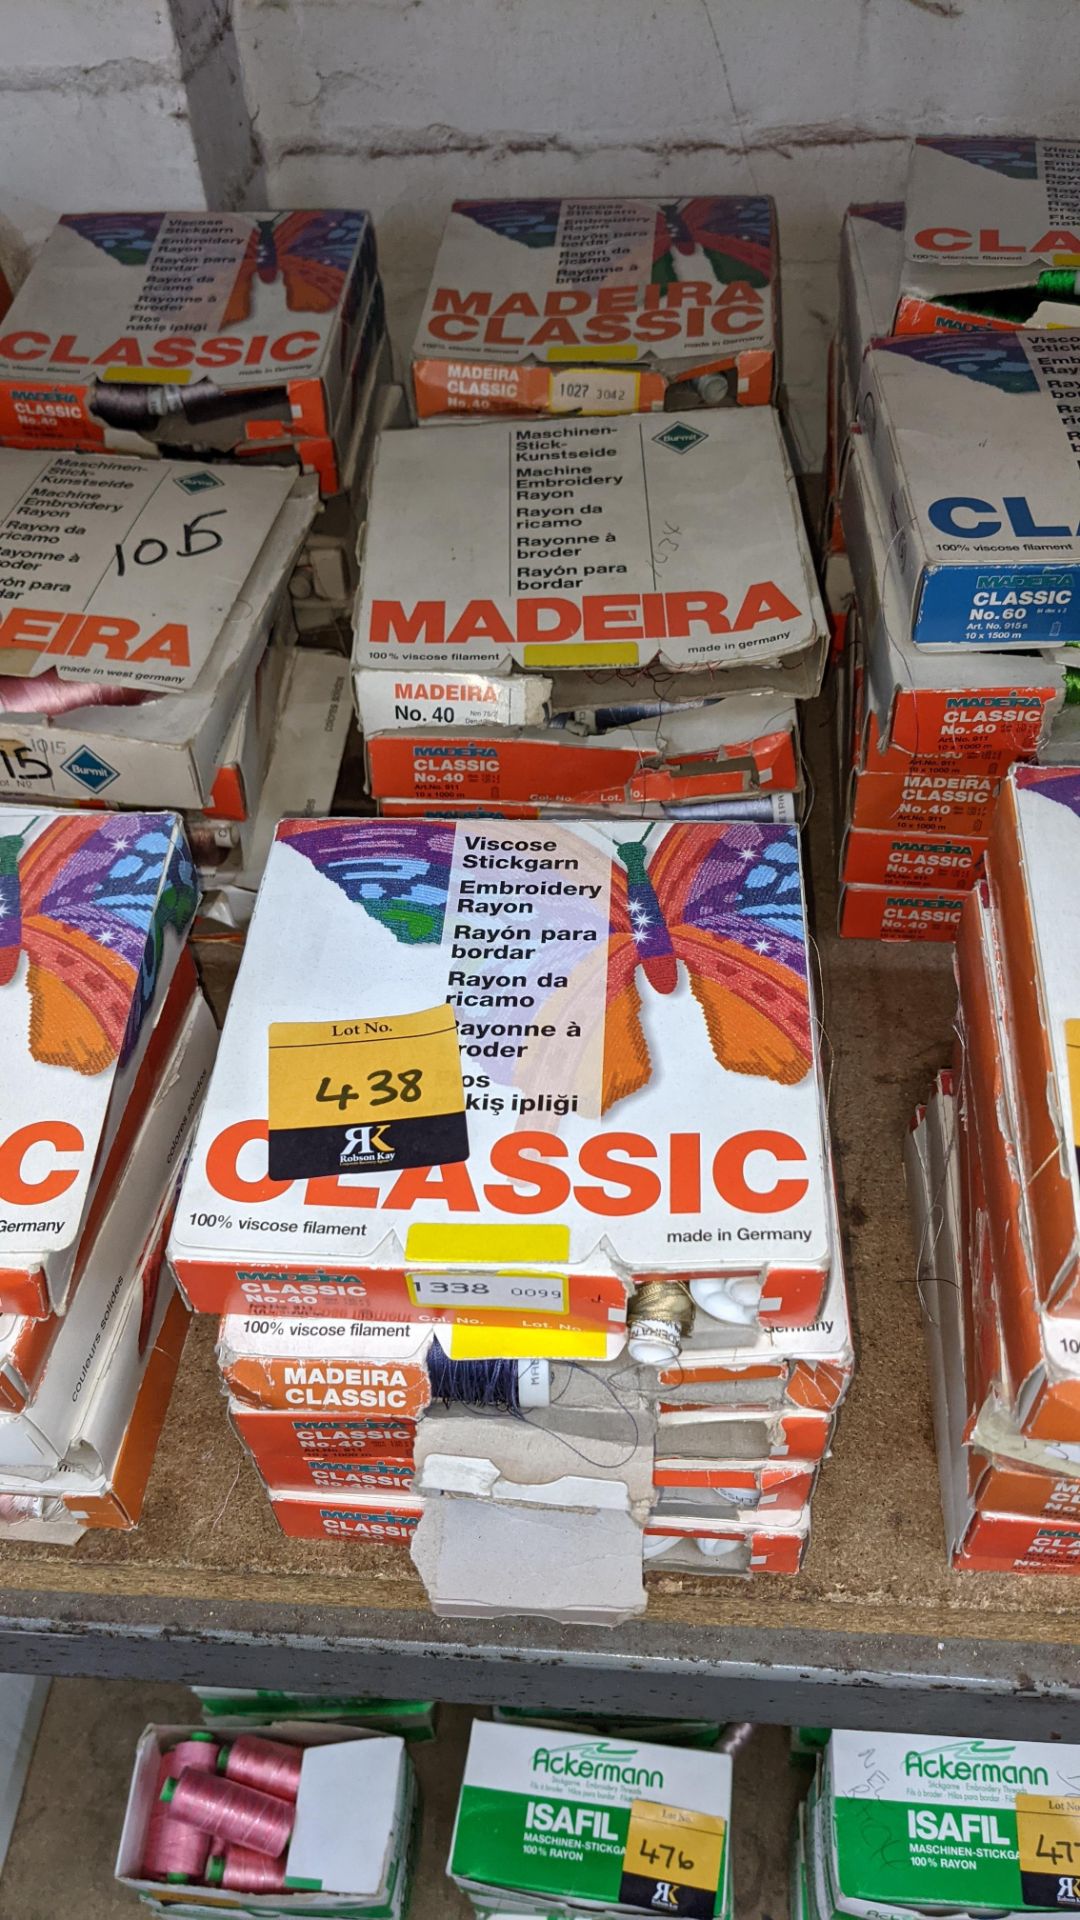 15 assorted boxes of Madeira Classic No. 40 embroidery rayon thread - Image 2 of 8